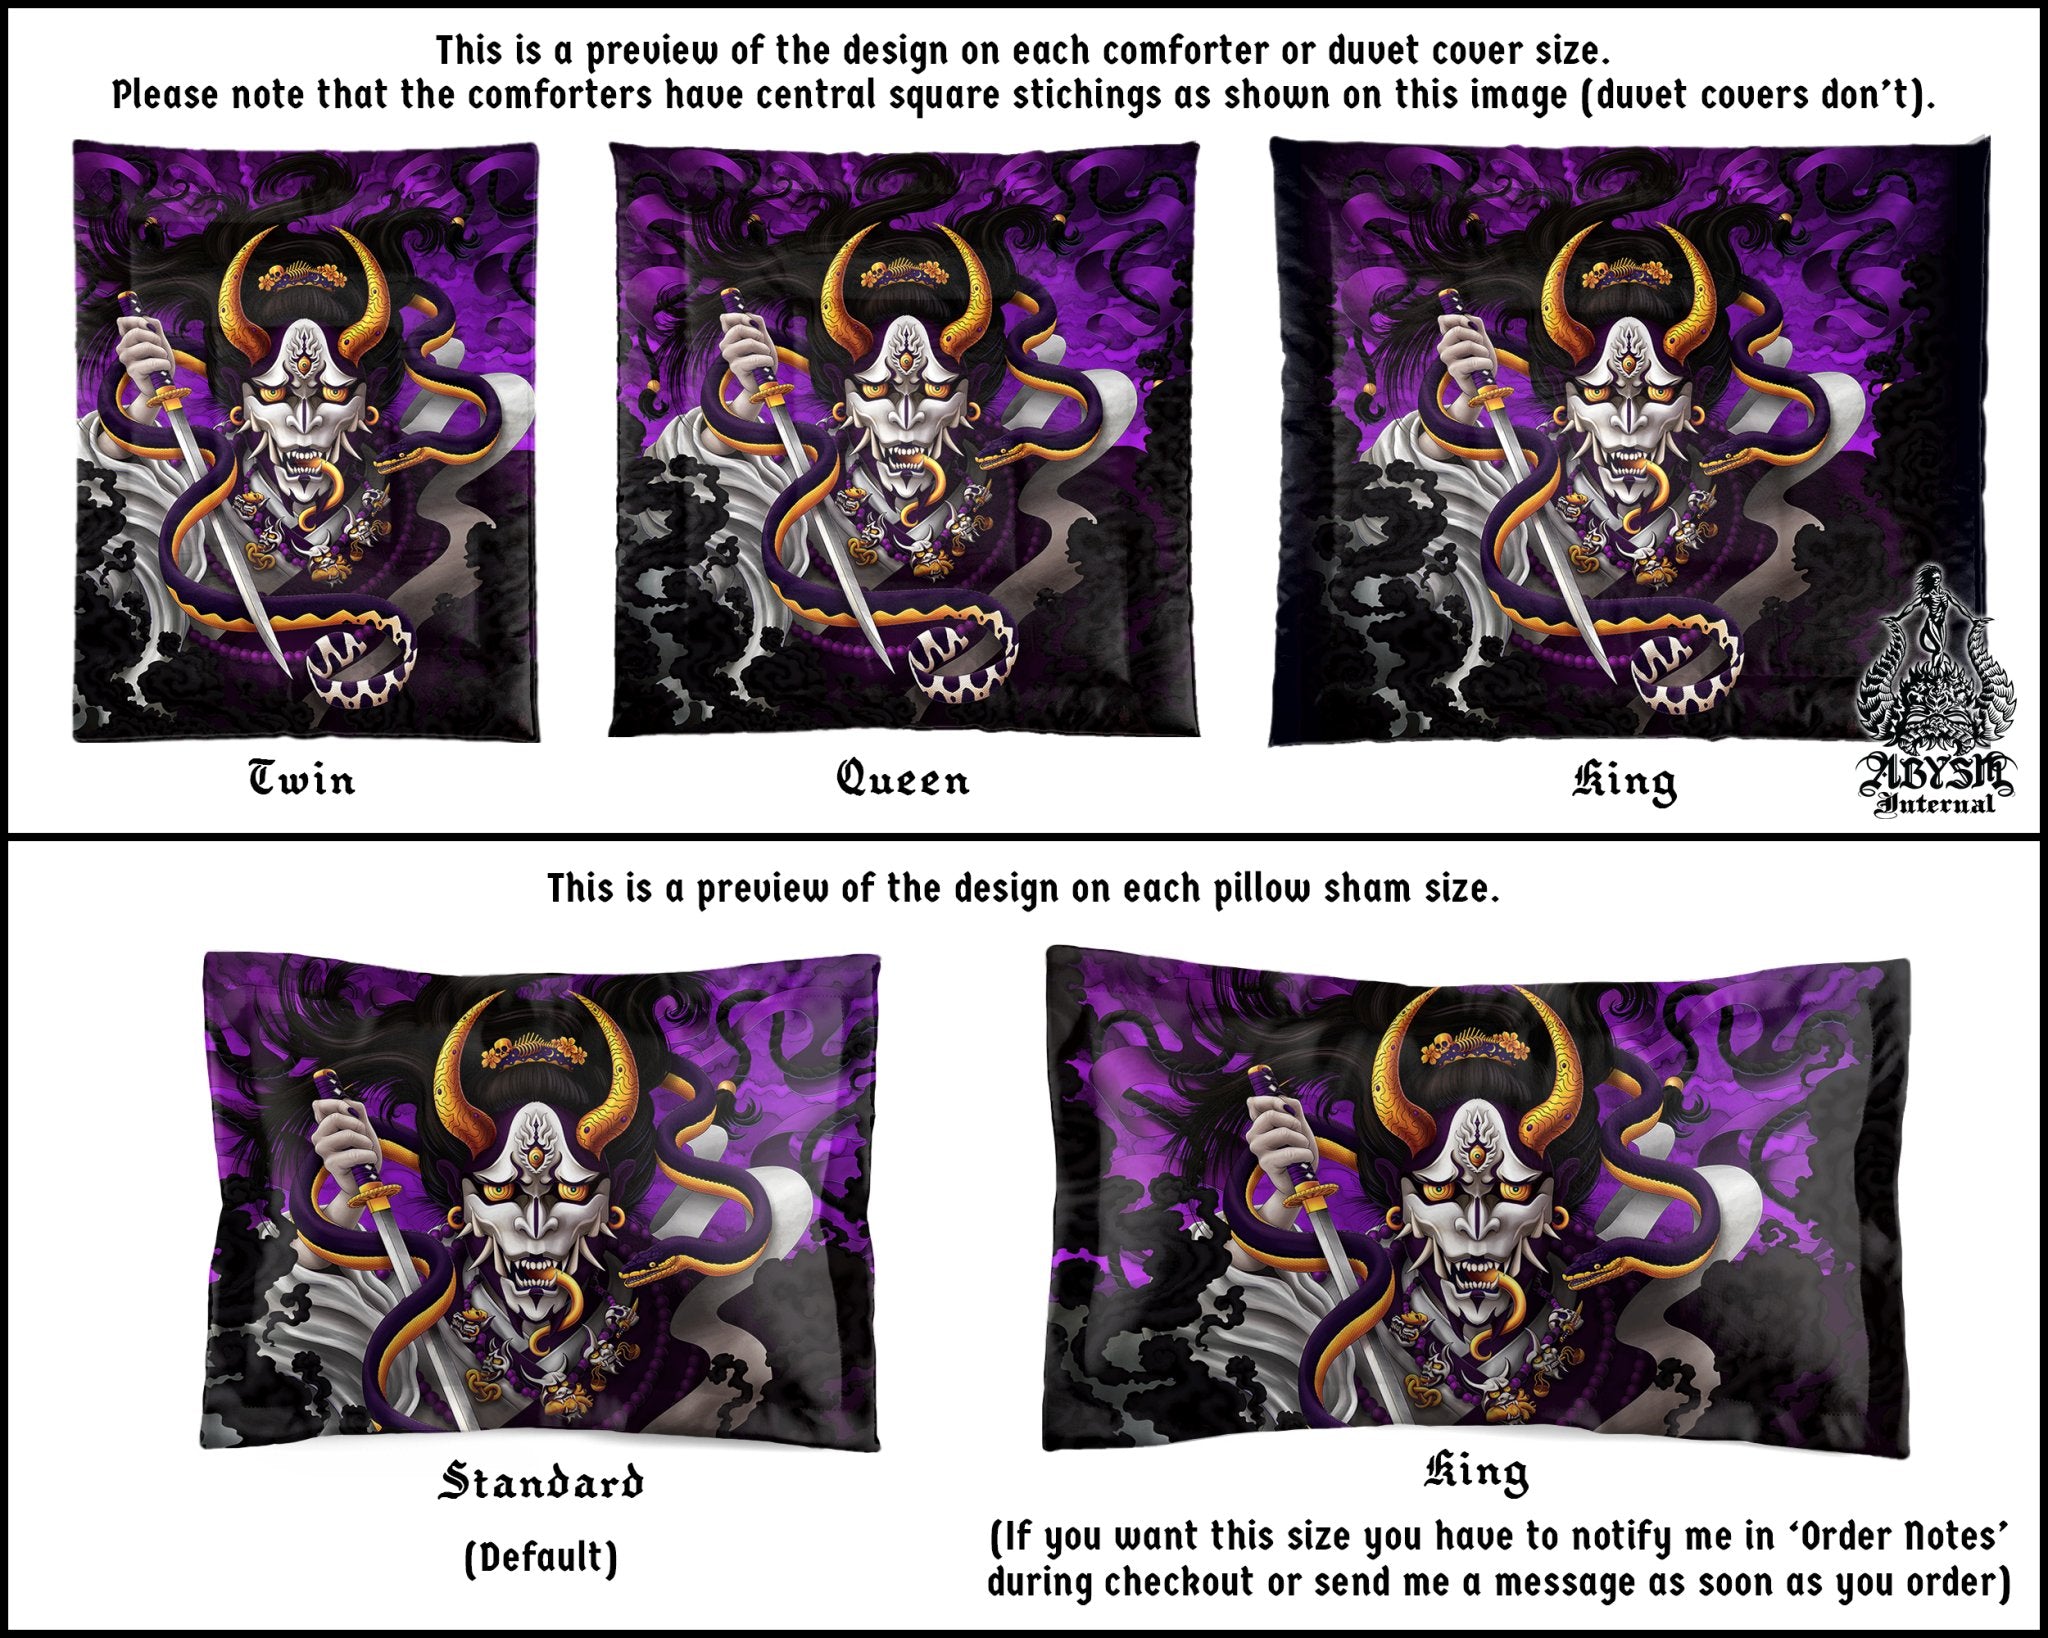 Hannya Bedding Set, Comforter or Duvet, Anime Bed Cover, Purple White Goth Bedroom Decor, King, Queen & Twin Size - Snake and Japanese Demon - Abysm Internal